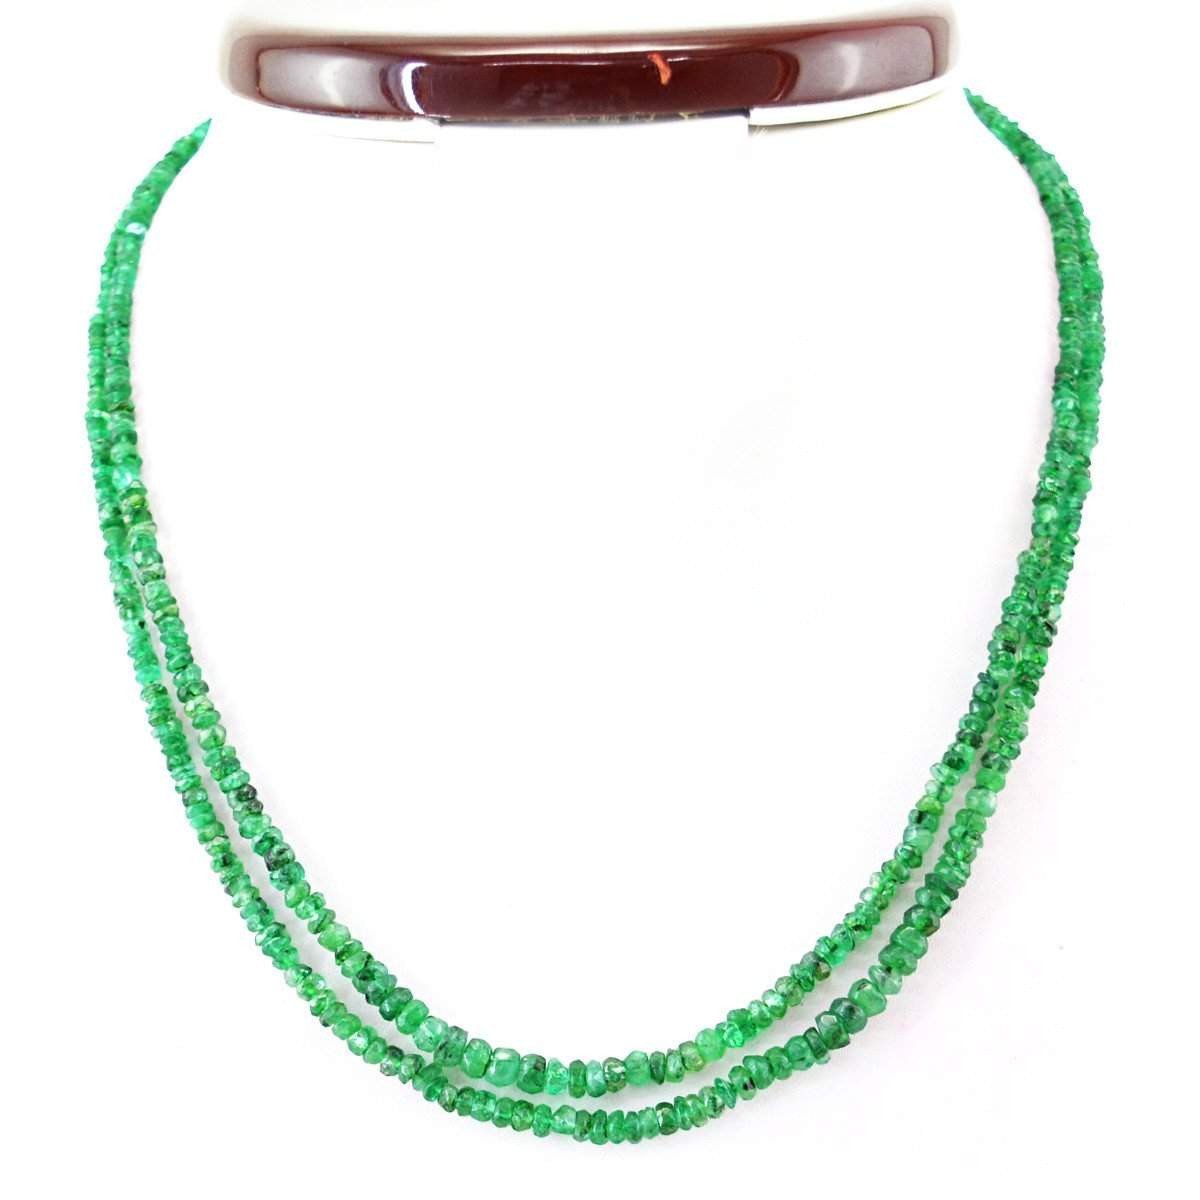 gemsmore:Natural Untreated Green Emerald Necklace 2 Line Round Cut Beads